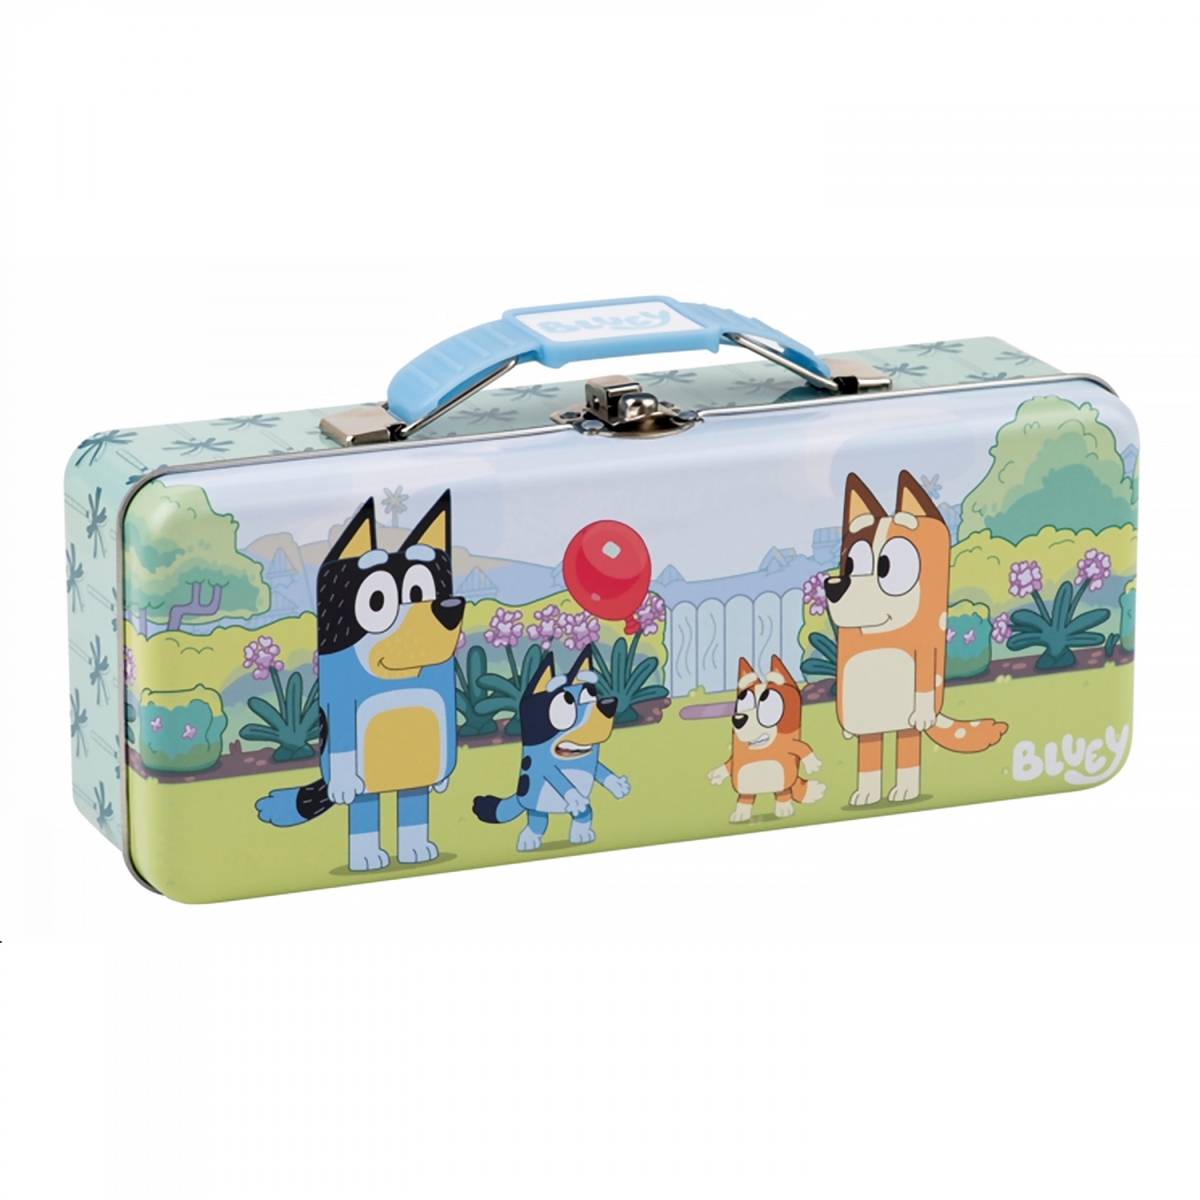 Picture of Bluey 867029 Bluey Bright Day Small Carry All Tin Tote